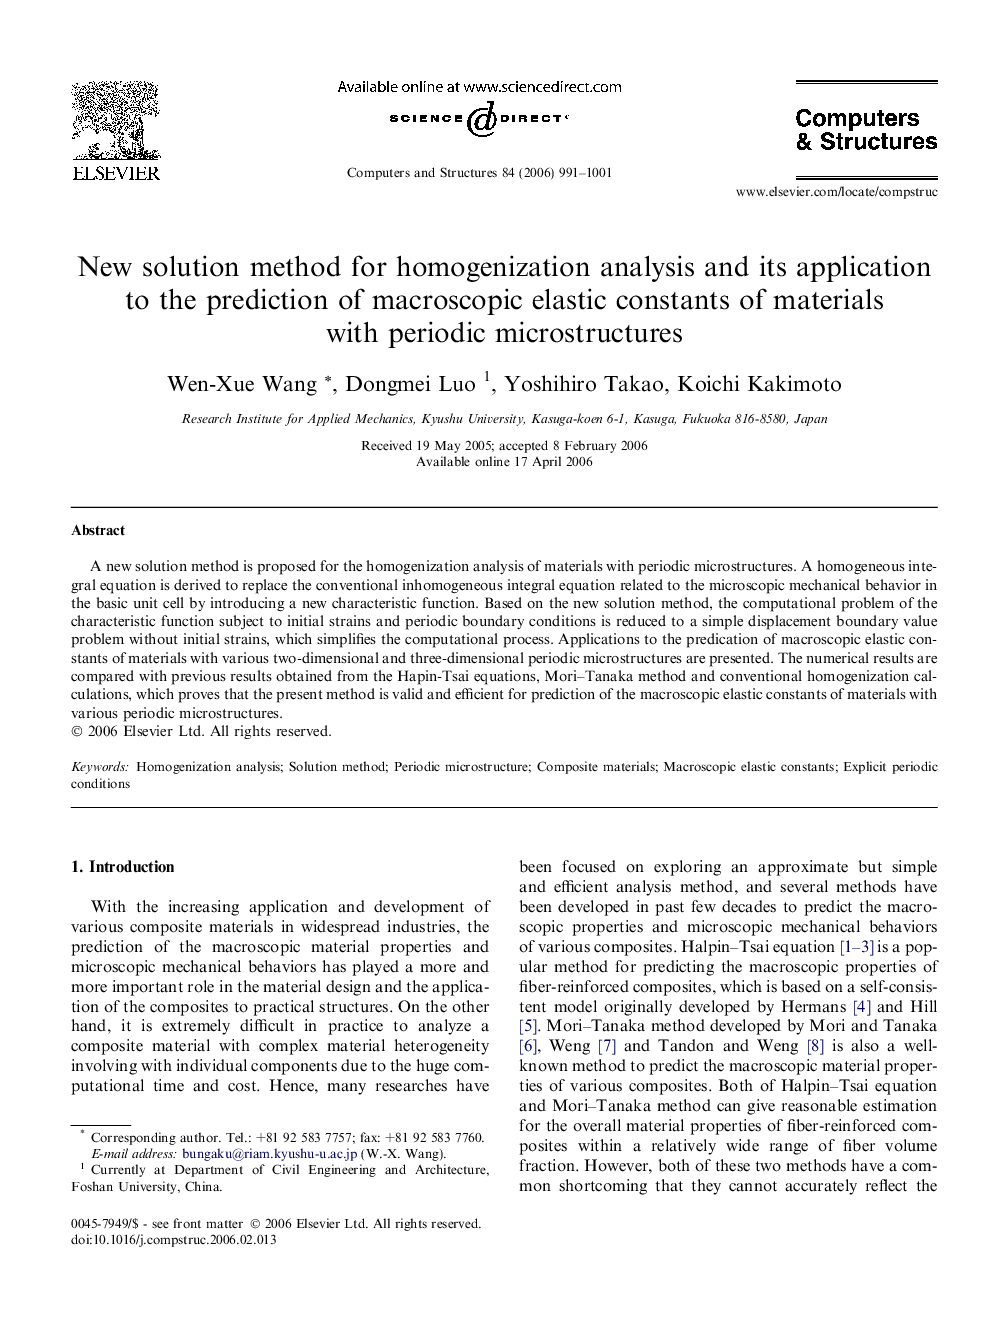 New solution method for homogenization analysis and its application to the prediction of macroscopic elastic constants of materials with periodic microstructures